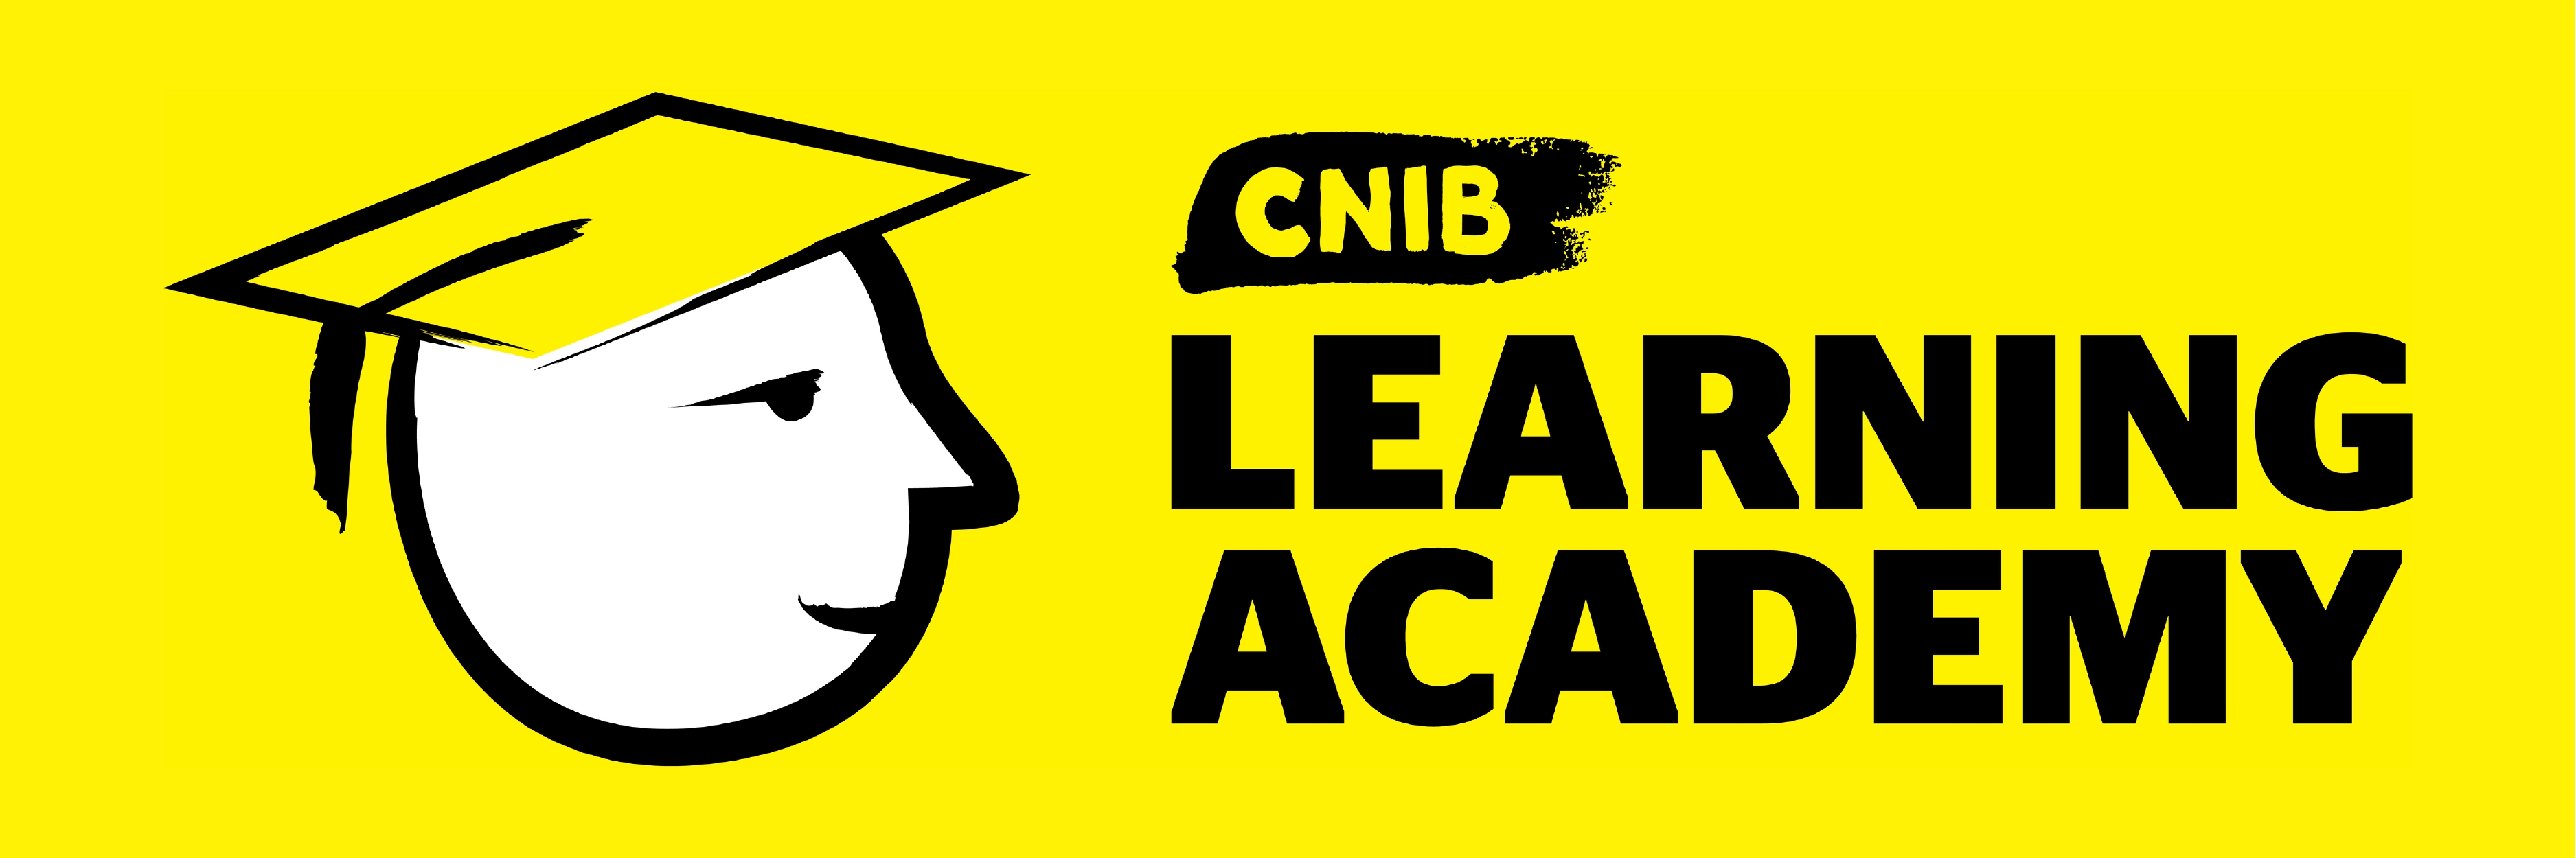 CNIB Learning Academy logo. A graphic-art illustration of a smiling face/icon wearing a graduation cap with white accents. Text: CNIB Learning Academy